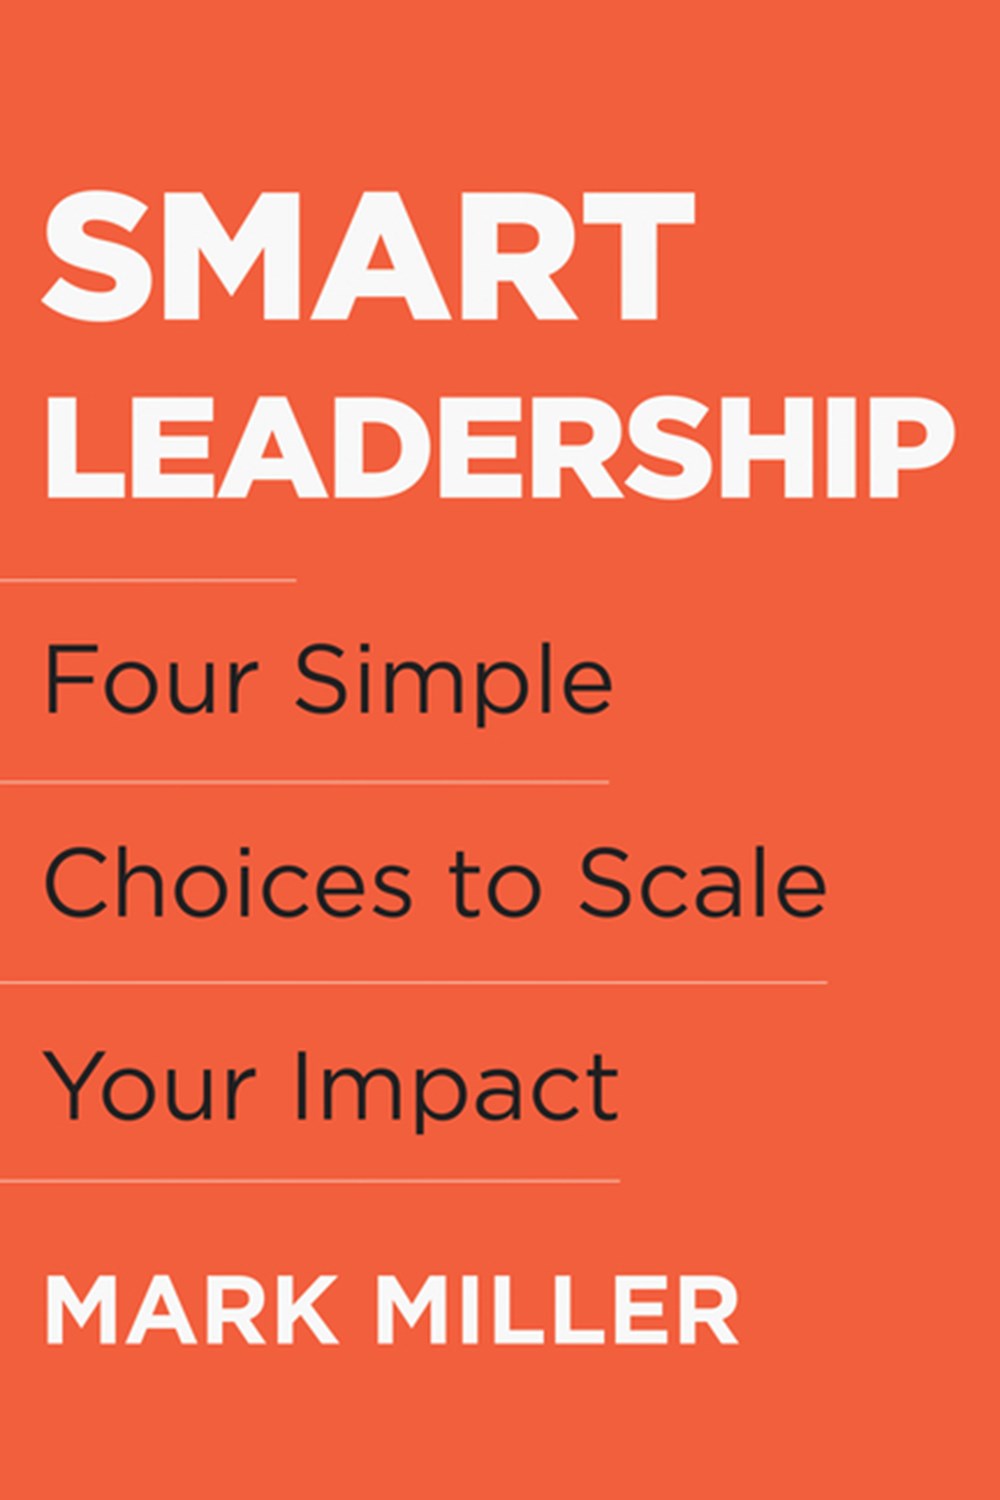 Smart Leadership Four Simple Choices to Scale Your Impact